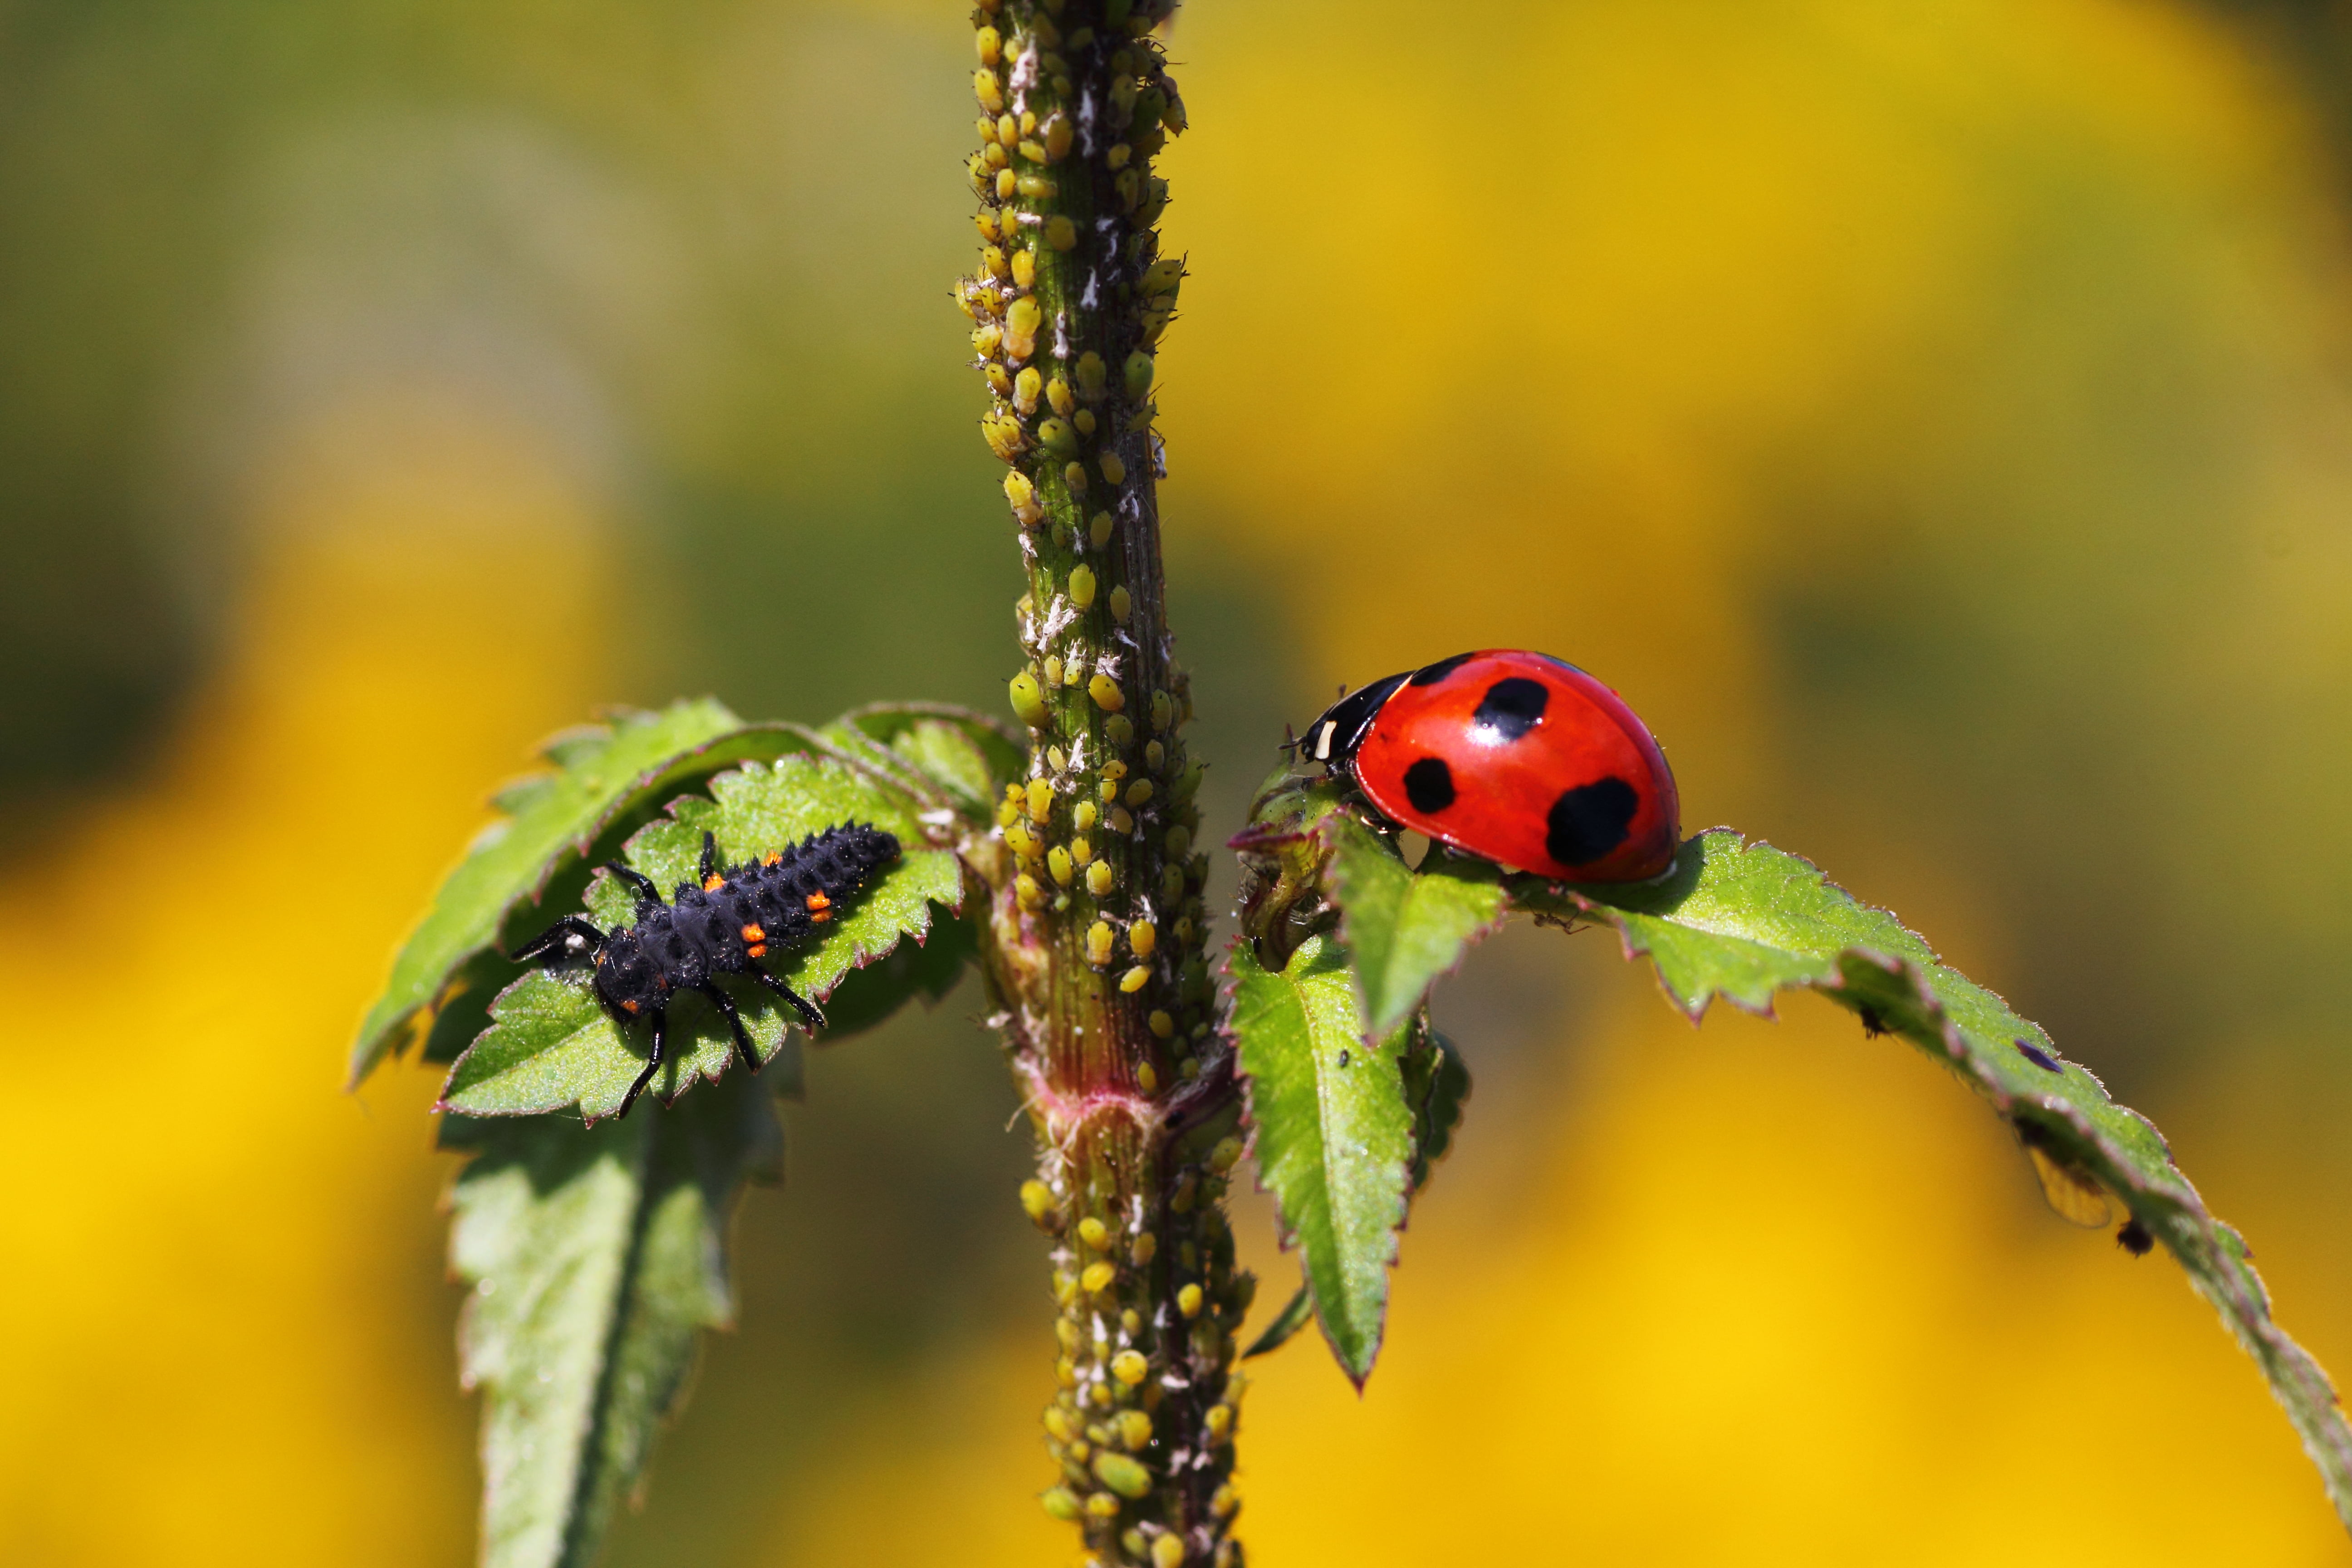 Red and black spotted bug on green plant stem closeup photography ...